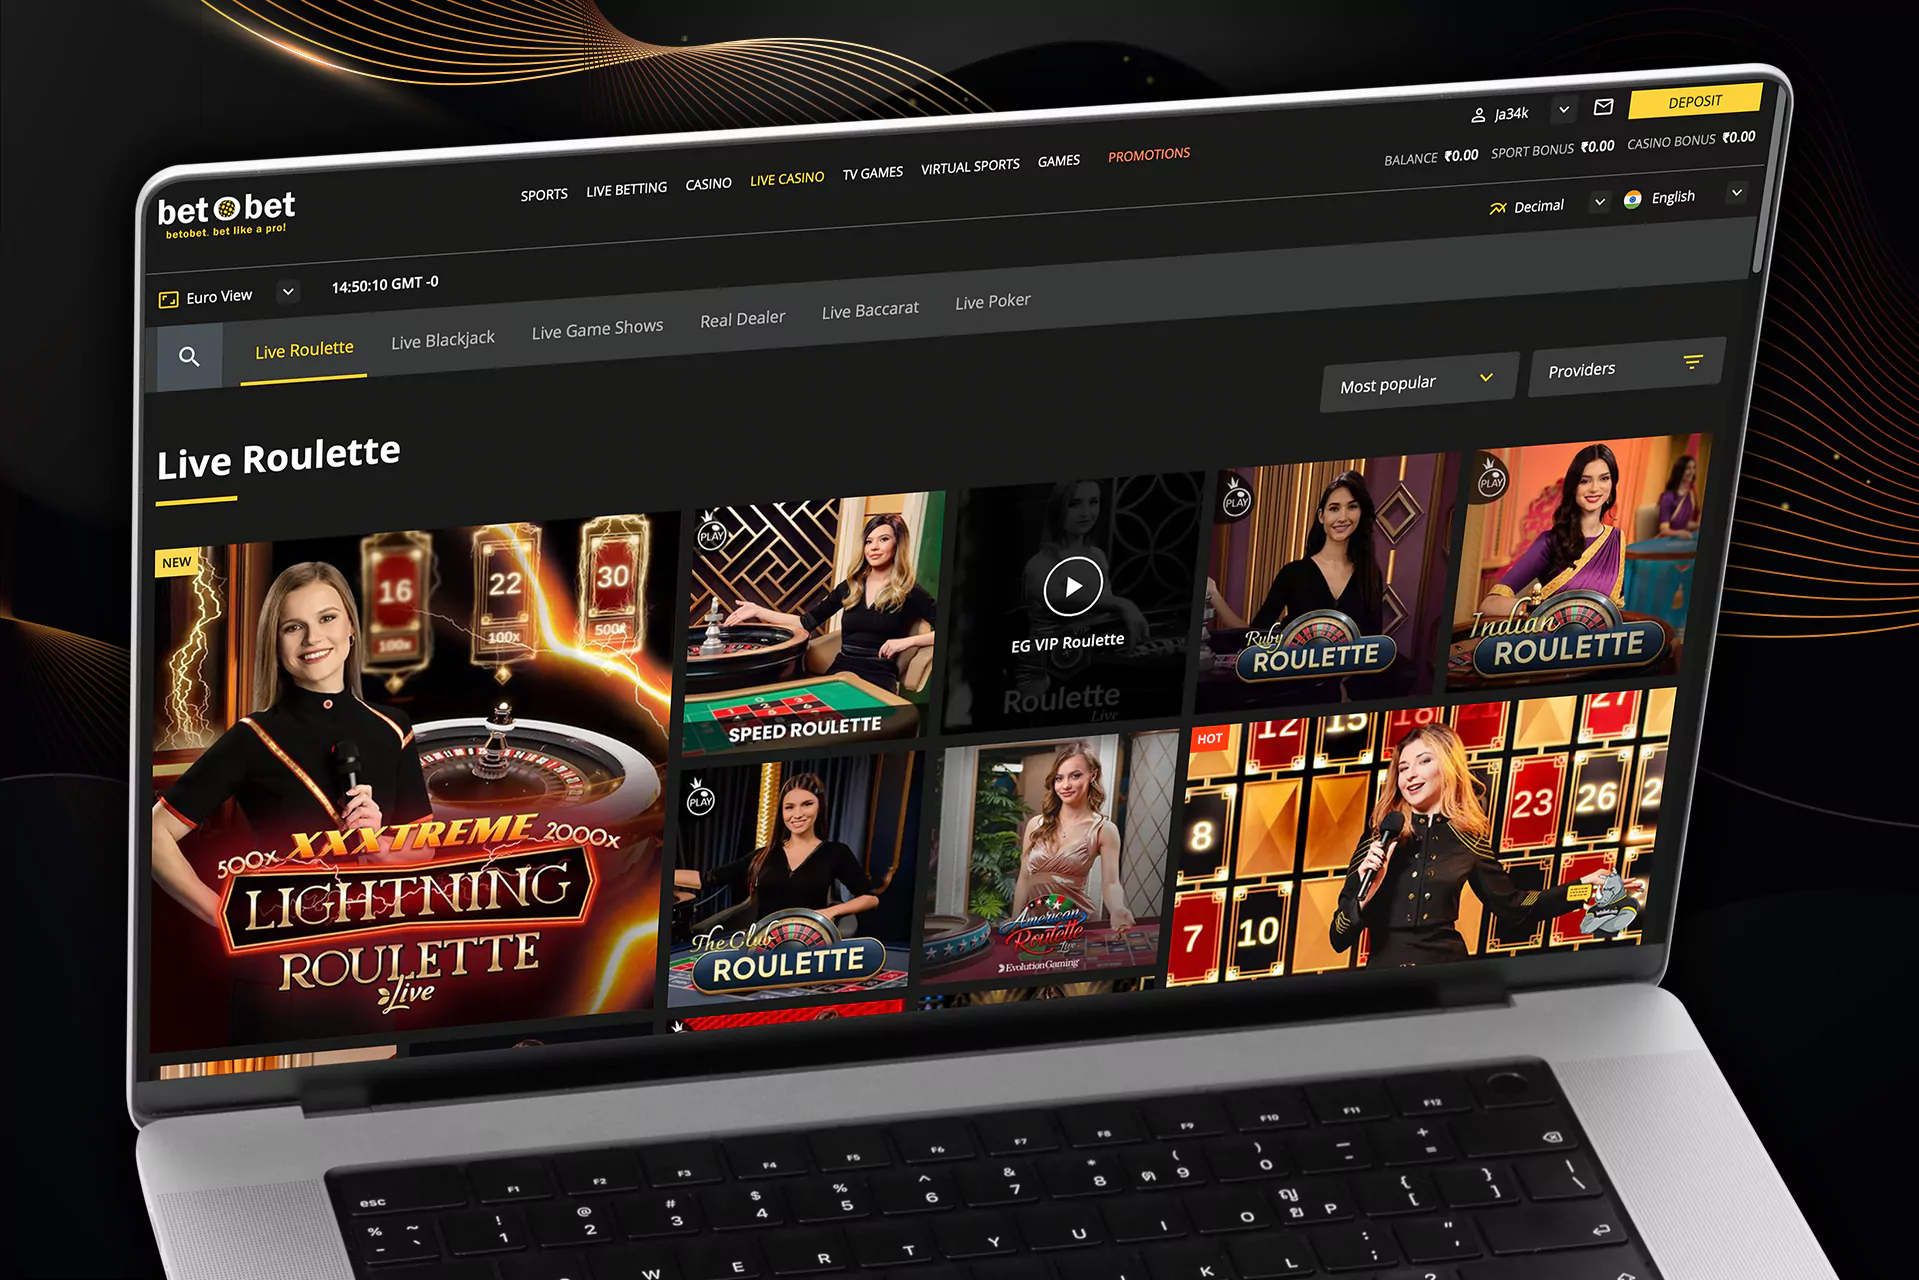 Play casino games with real dealers.